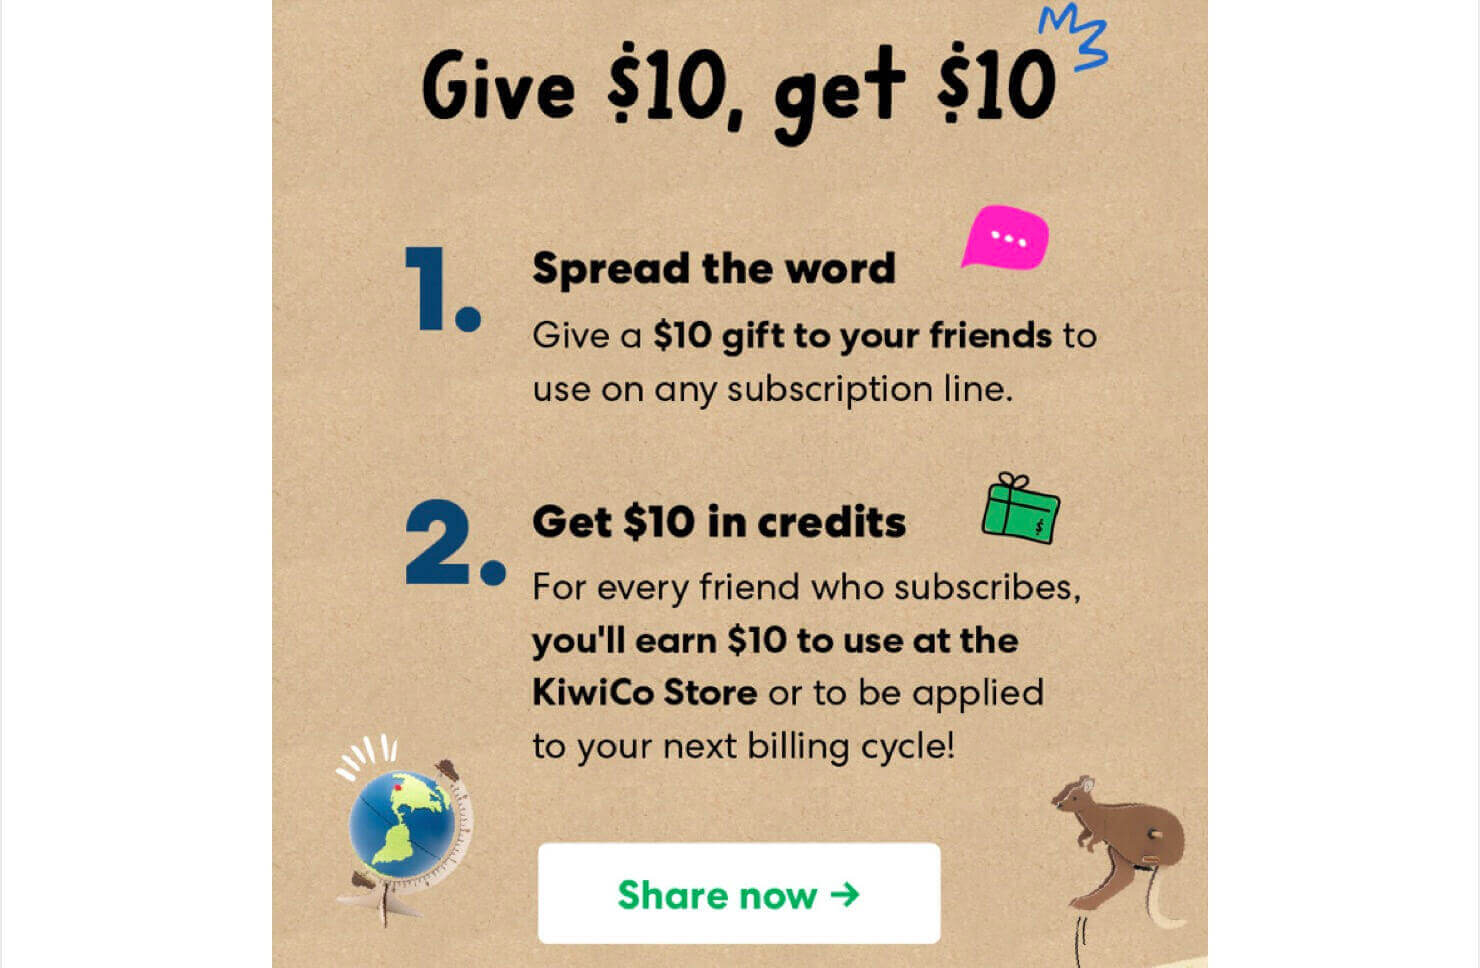 Email from KiwiCo that says, "Give , get . 1. Spread the word. Give a  gift to your friends to use on any subscription line. 2. Get  in credits. For every friend who subscribes, you'll earn $10 to use at the KiwiCo Store or to be applied to your next billing cycle!" The CTA button says "Share now"